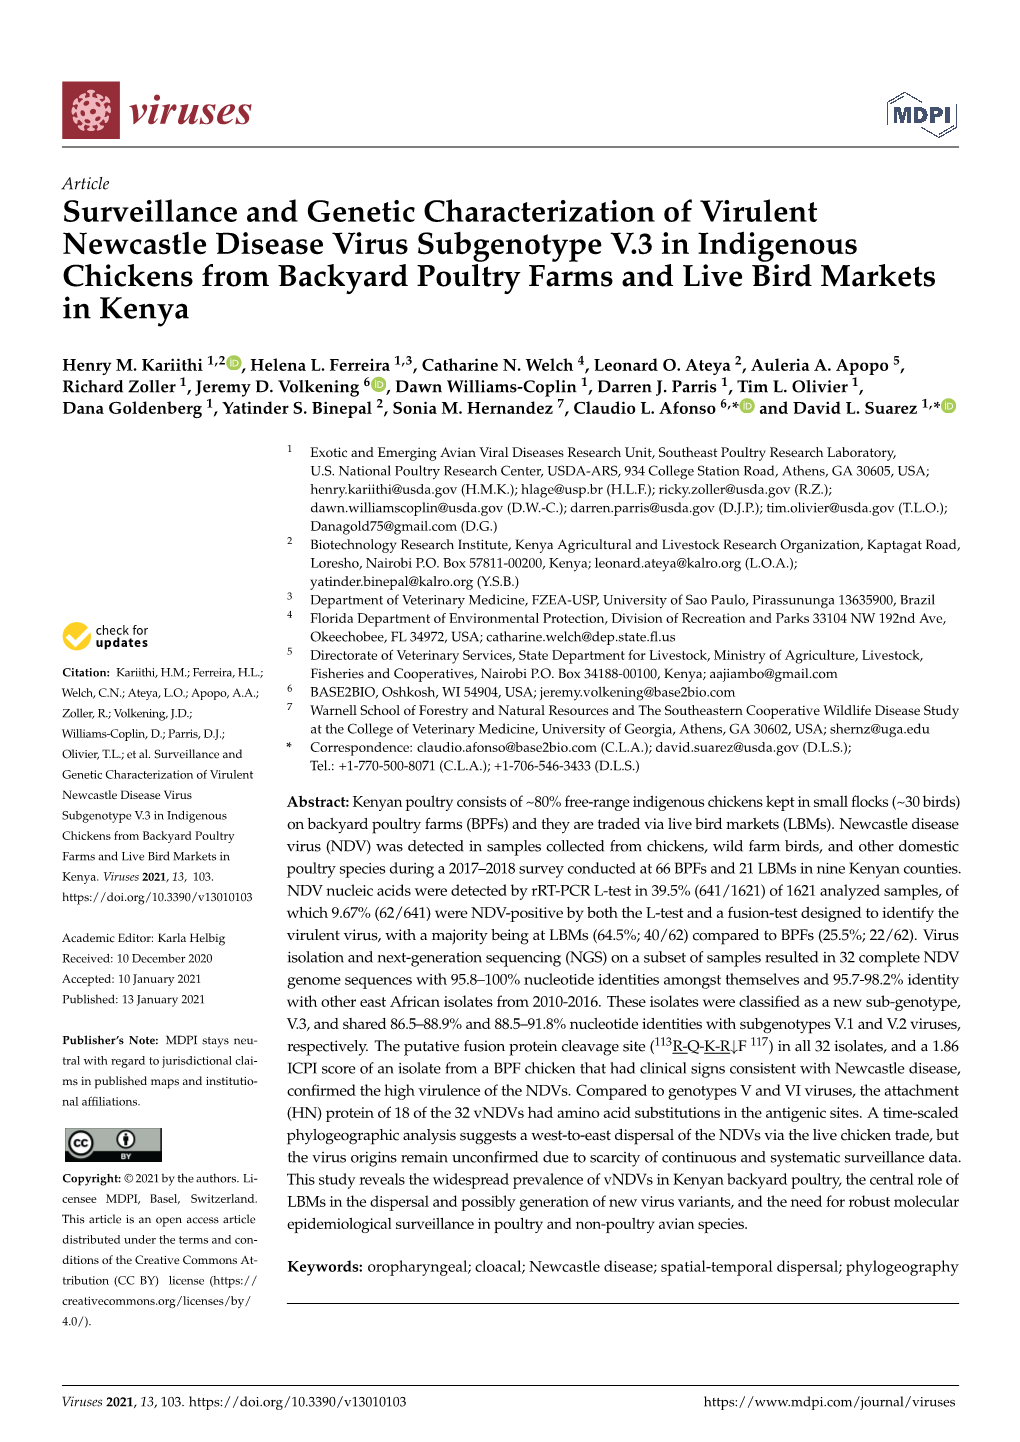 Surveillance and Genetic Characterization of Virulent Newcastle Disease Virus Subgenotype V.3 in Indigenous Chickens from Backya